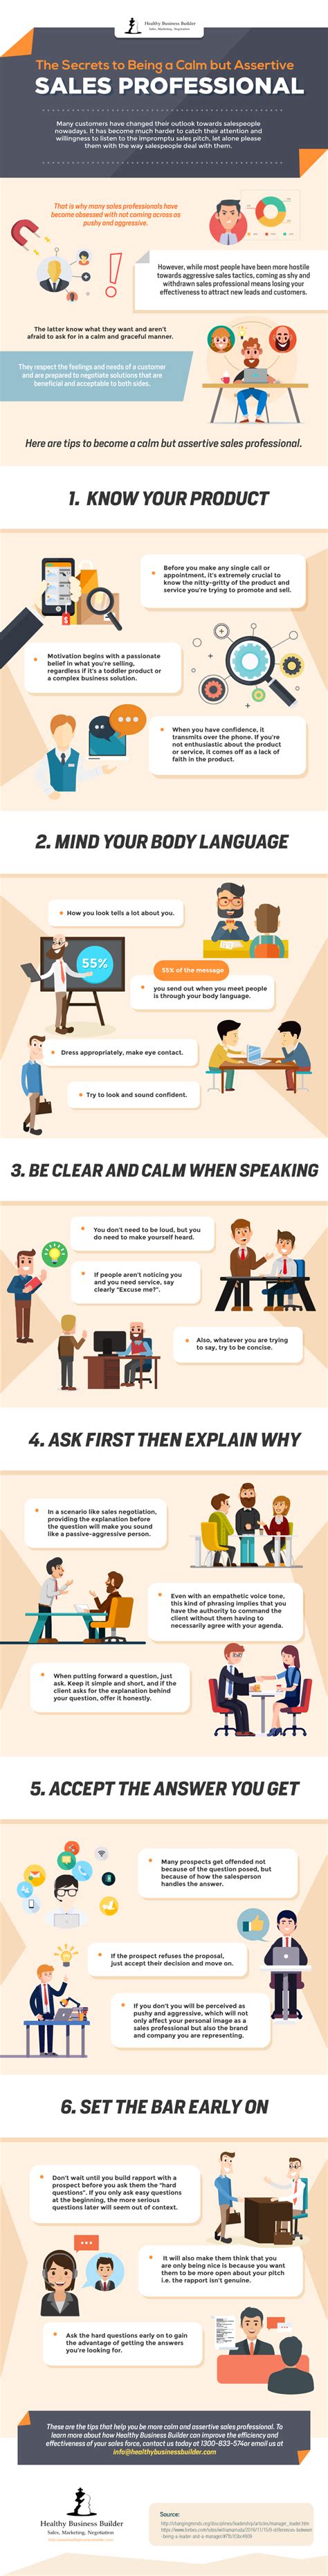 The Secrets To Being A Calm But Assertive Sales Professional Infographic By Healthy Business